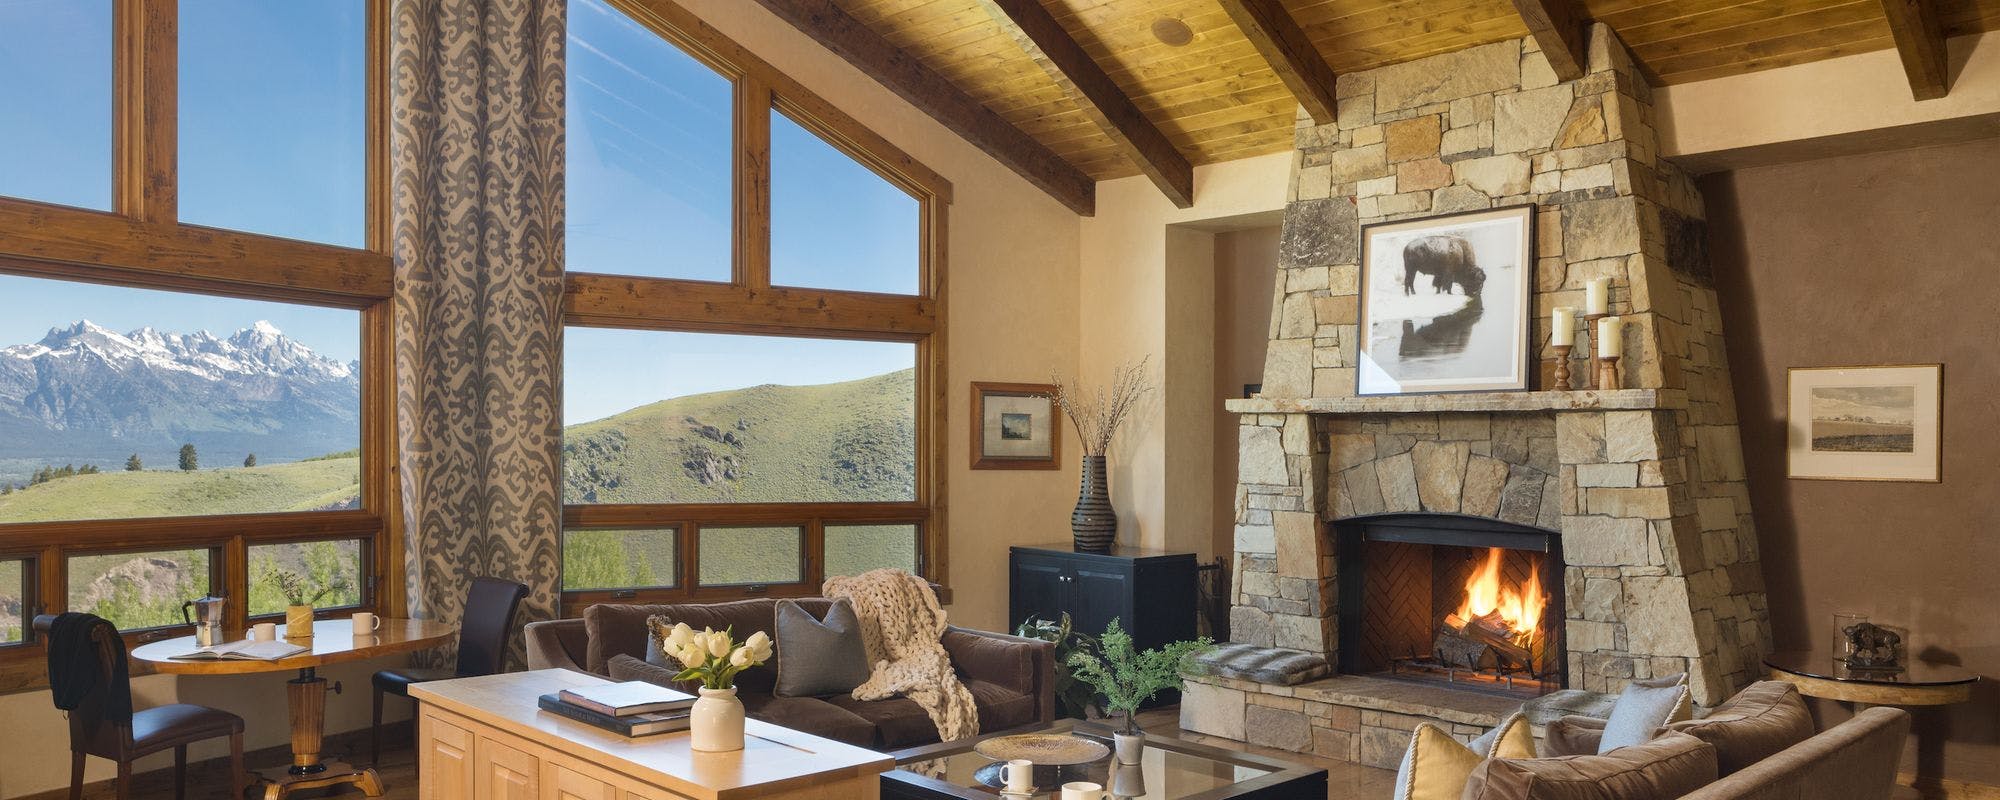 Spectacular views from this Jackson Hole vacation rental